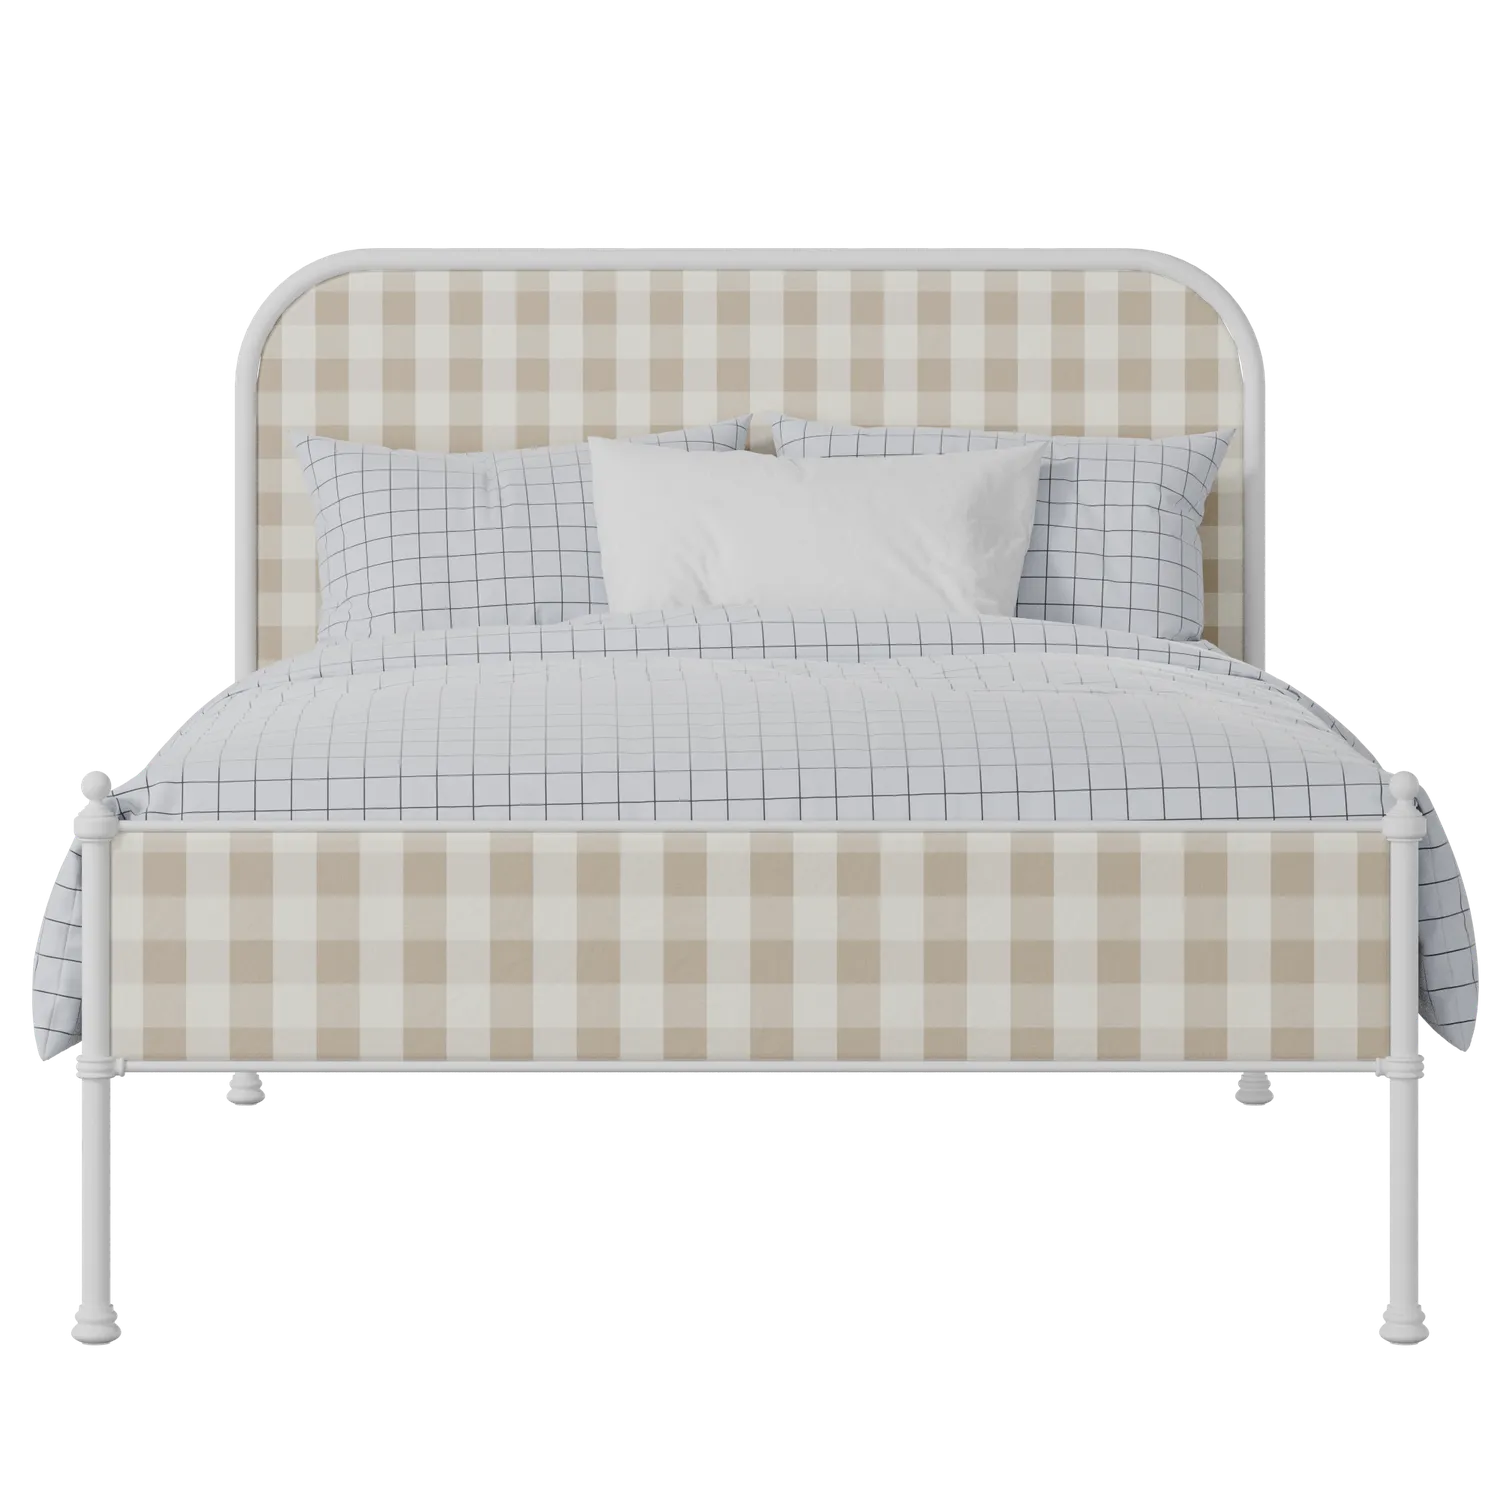 Bray Slim iron/metal upholstered bed in white with grey fabric